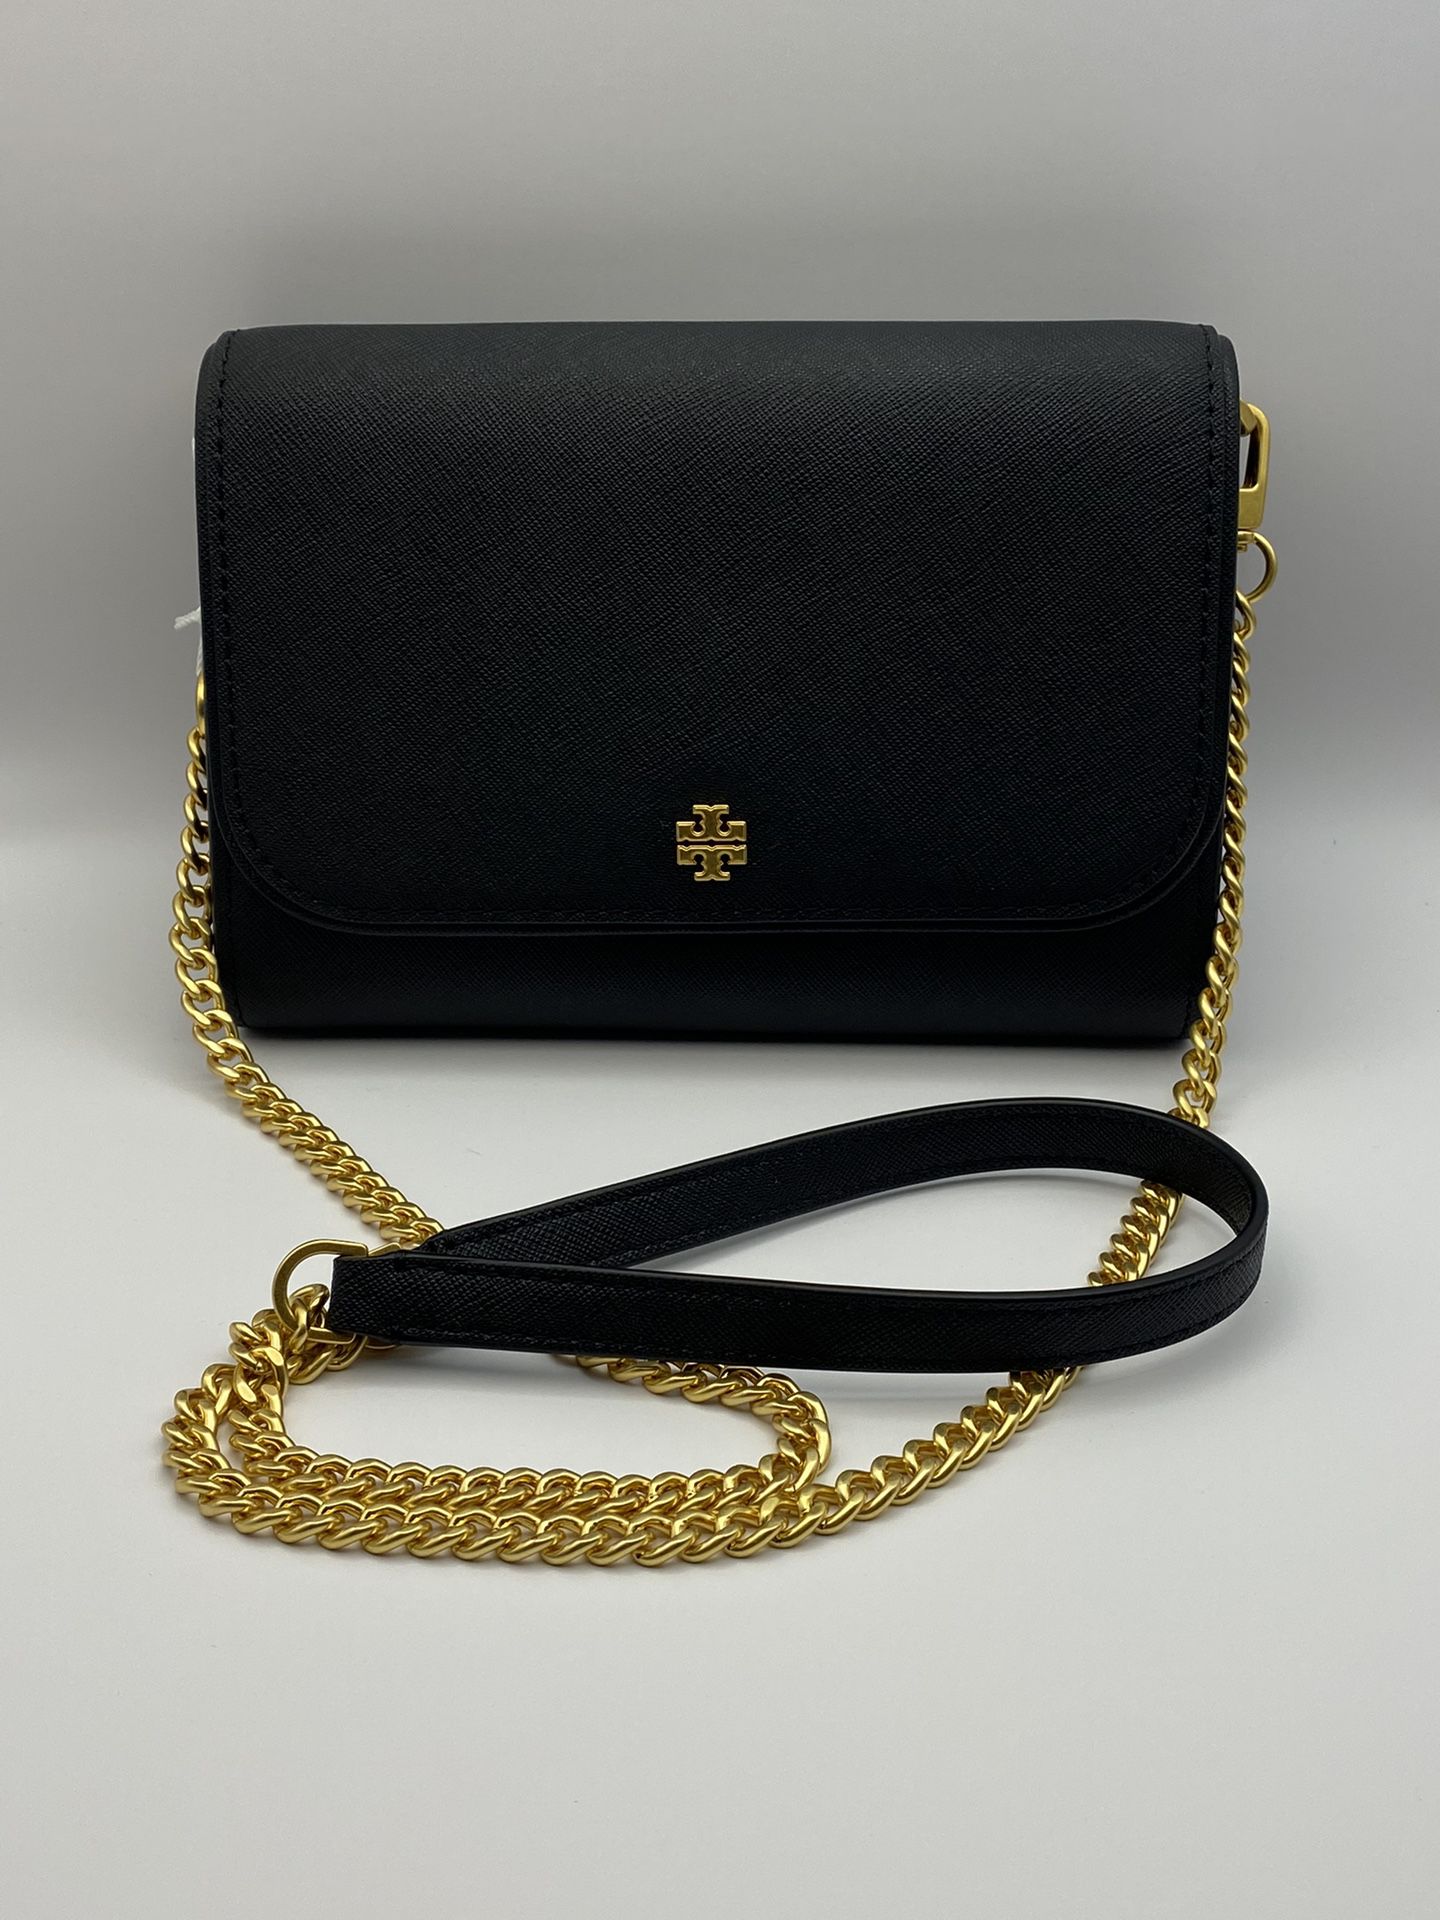 Tory Burch Emerson Black Wallet Crossbody Bag/Purse for Sale in Ontario, CA  - OfferUp